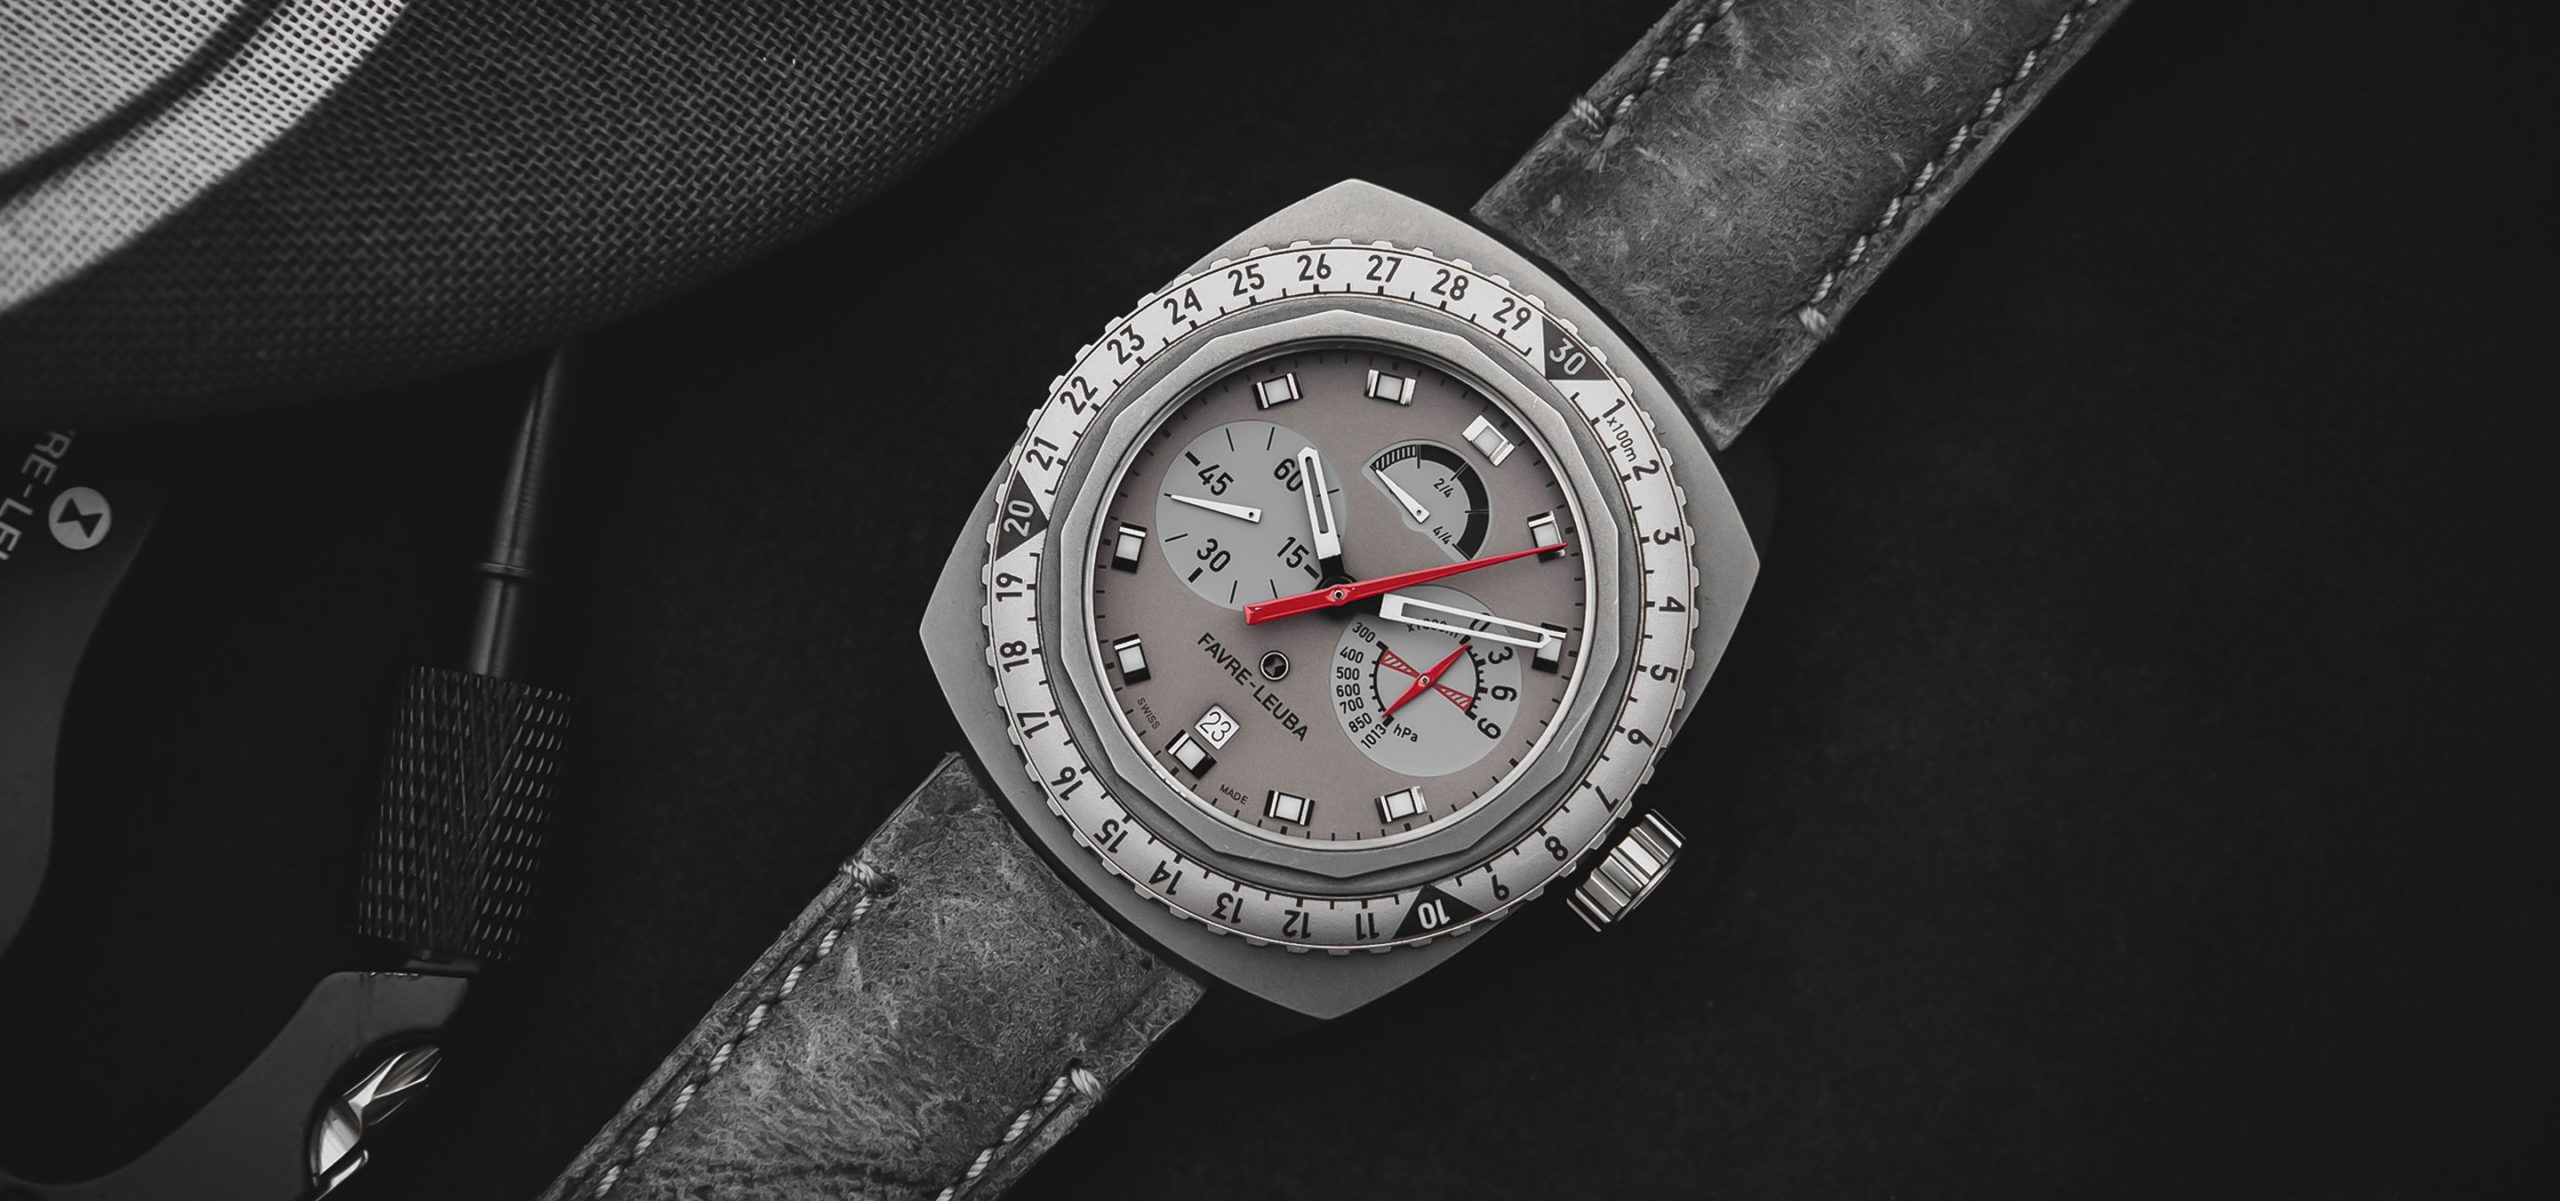 Defying Gravity, Defining Time: The Pioneering Pursuits Of The Favre Leuba Bivouac 9000